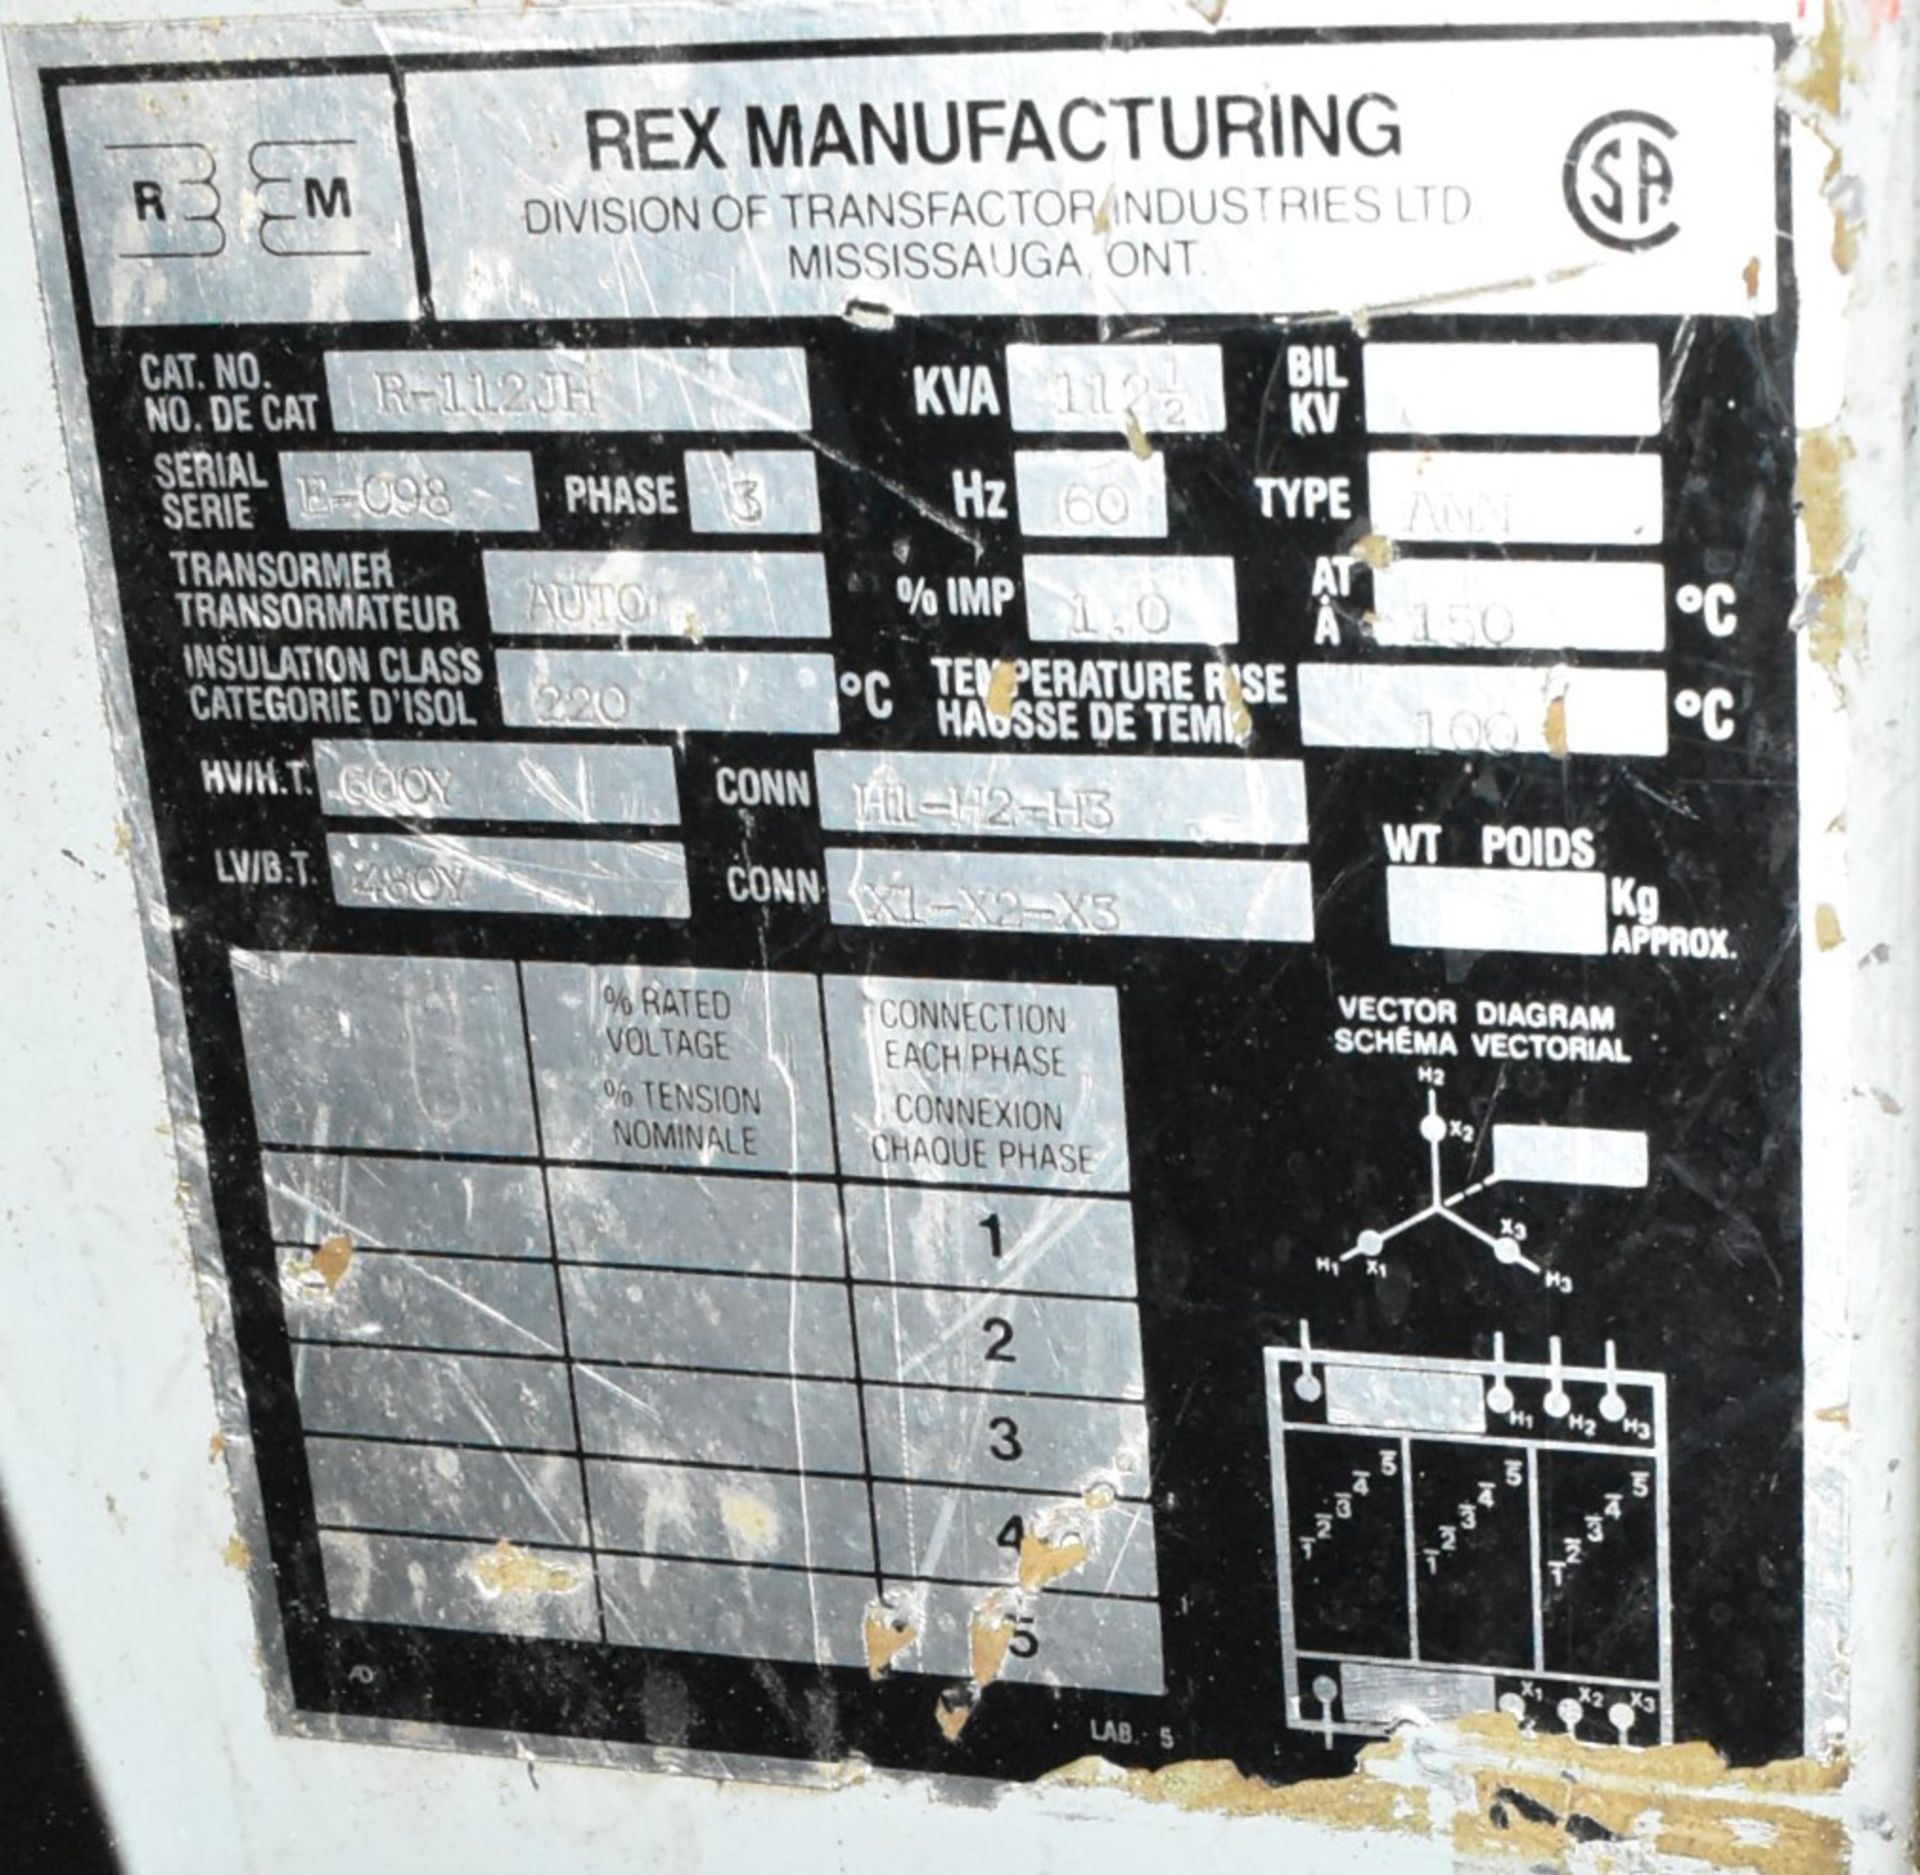 REX MFG R-112JH 112-1/2 KVA TRANSFORMER, 600-480V/3PH/60HZ, S/N E-098 (CI) (NOT IN SERVICE) - Image 2 of 2